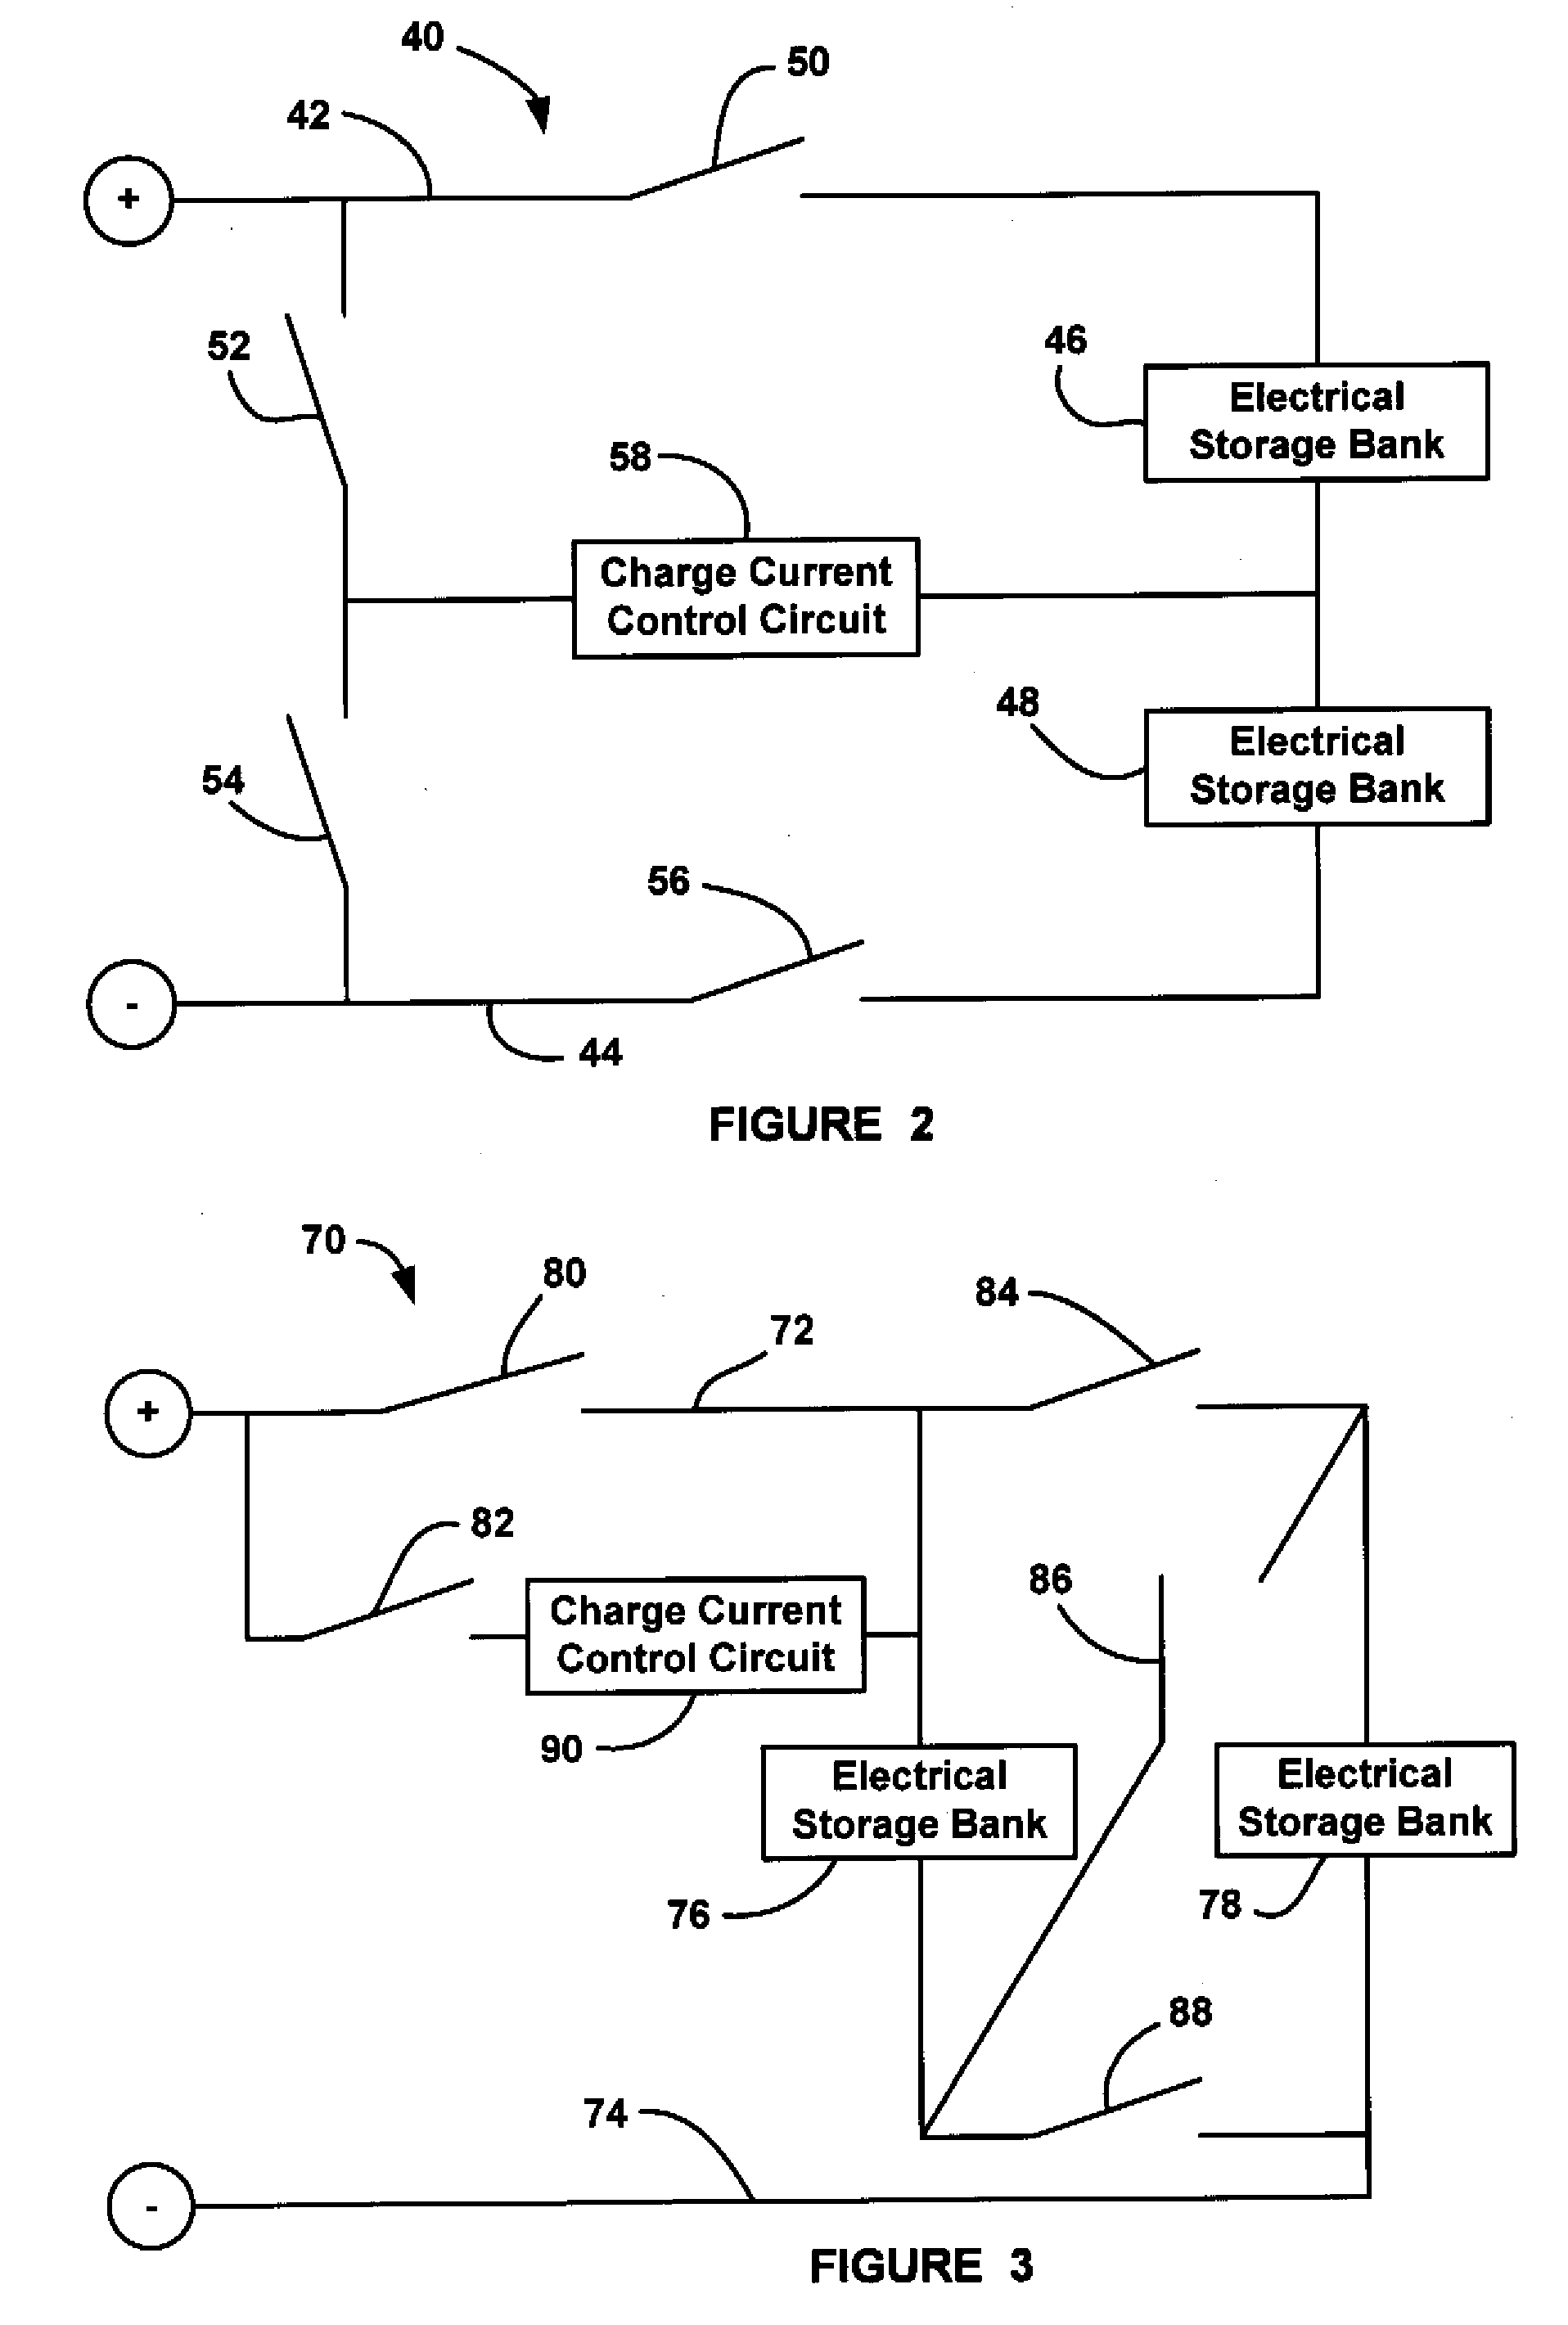 Method of fully charging an electrical energy storage device using a lower voltage fuel cell system